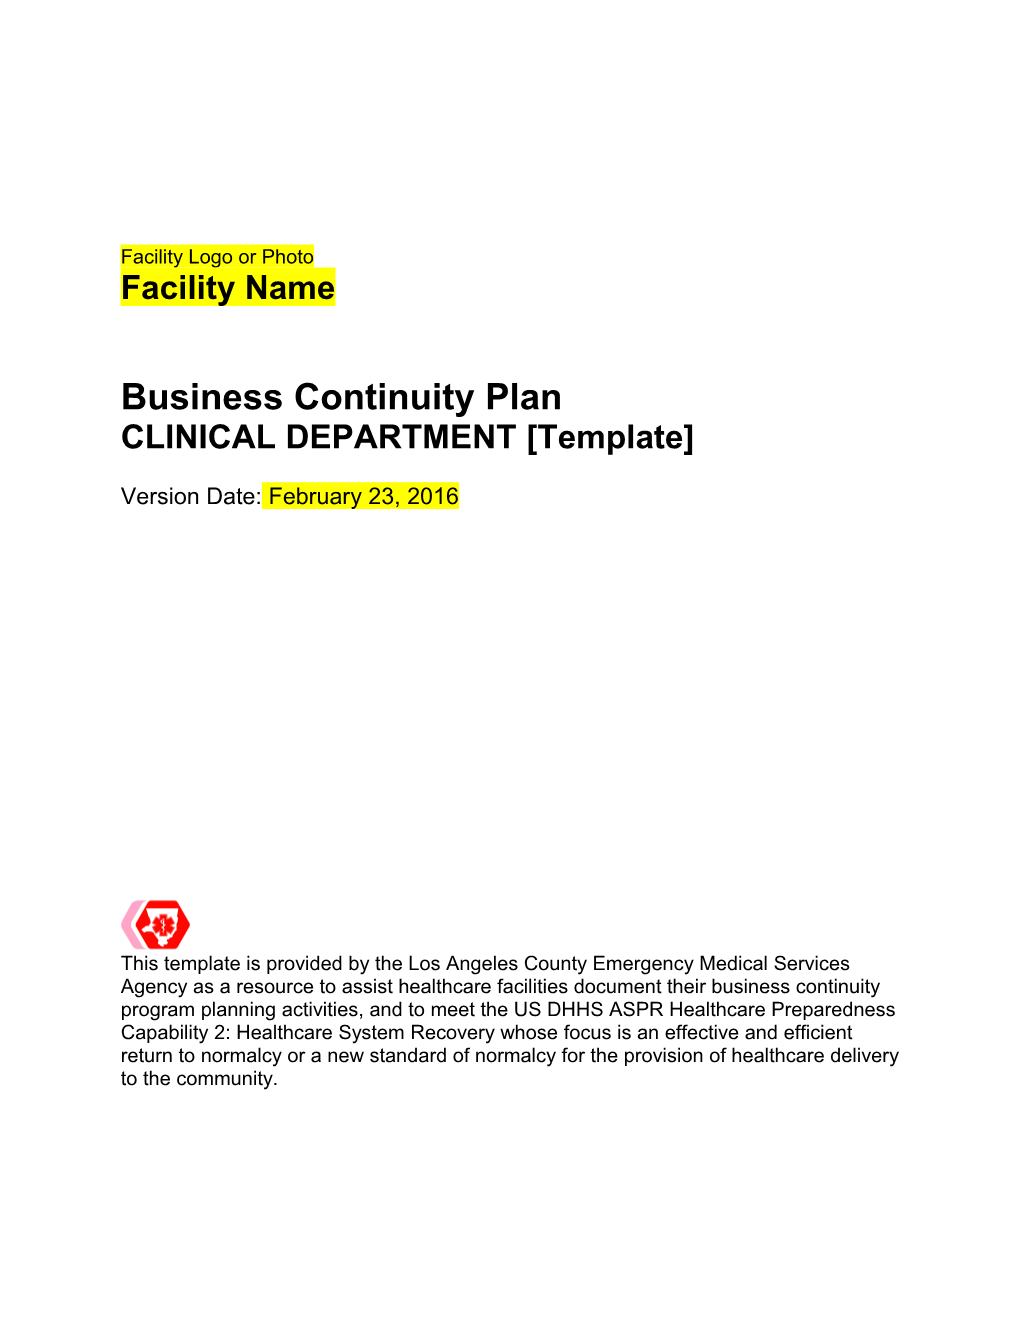 Business Continuity Plan: Clinical Department